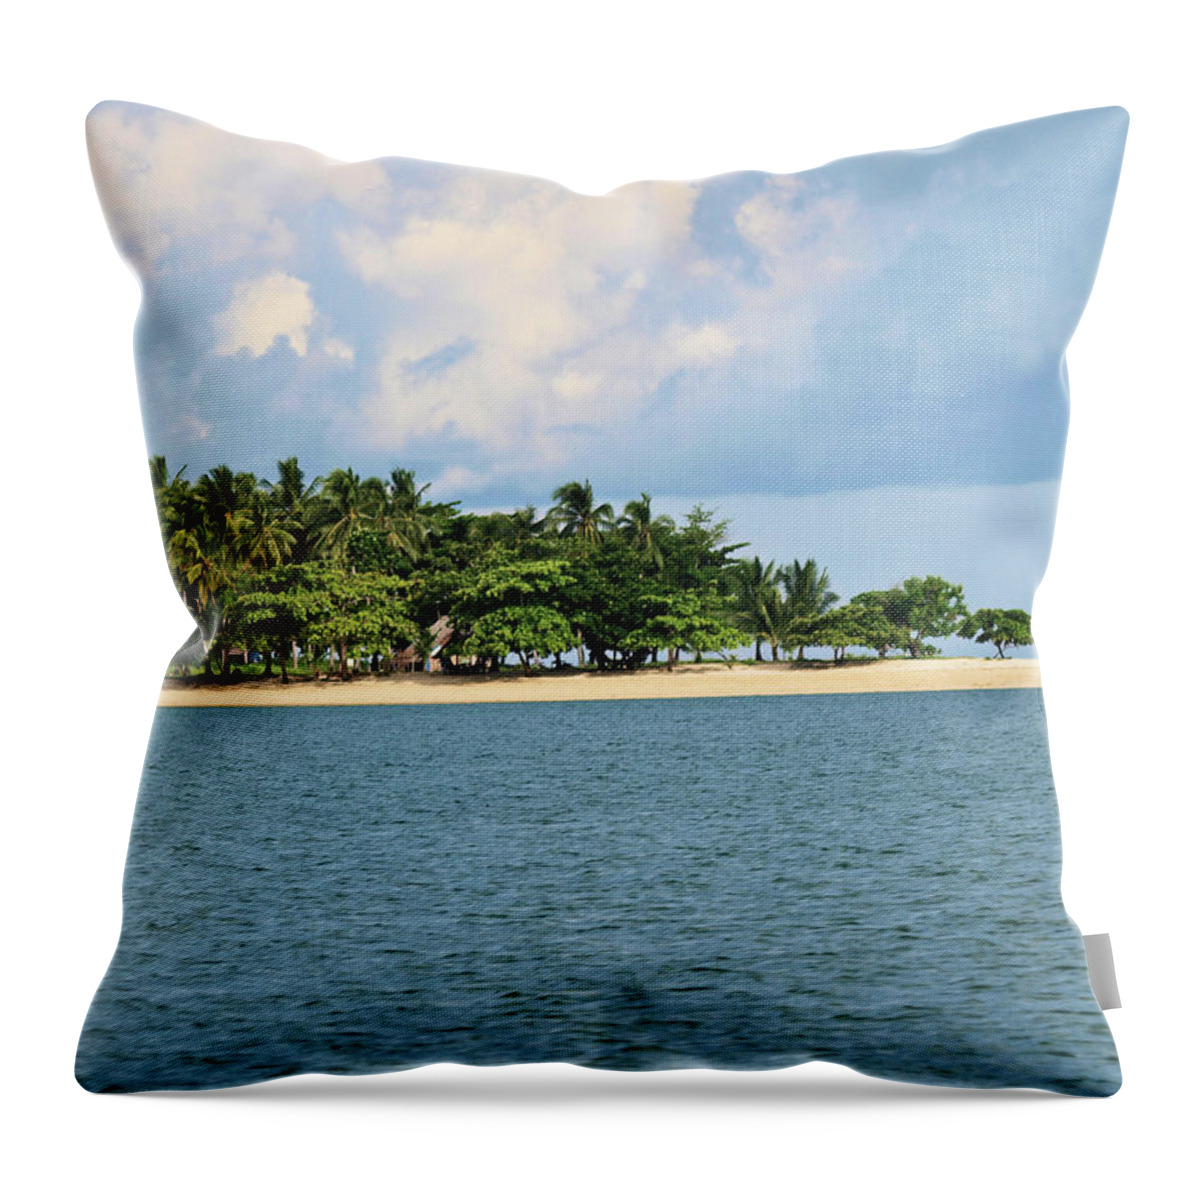 Asia Throw Pillow featuring the photograph Island Paradise by David Desautel